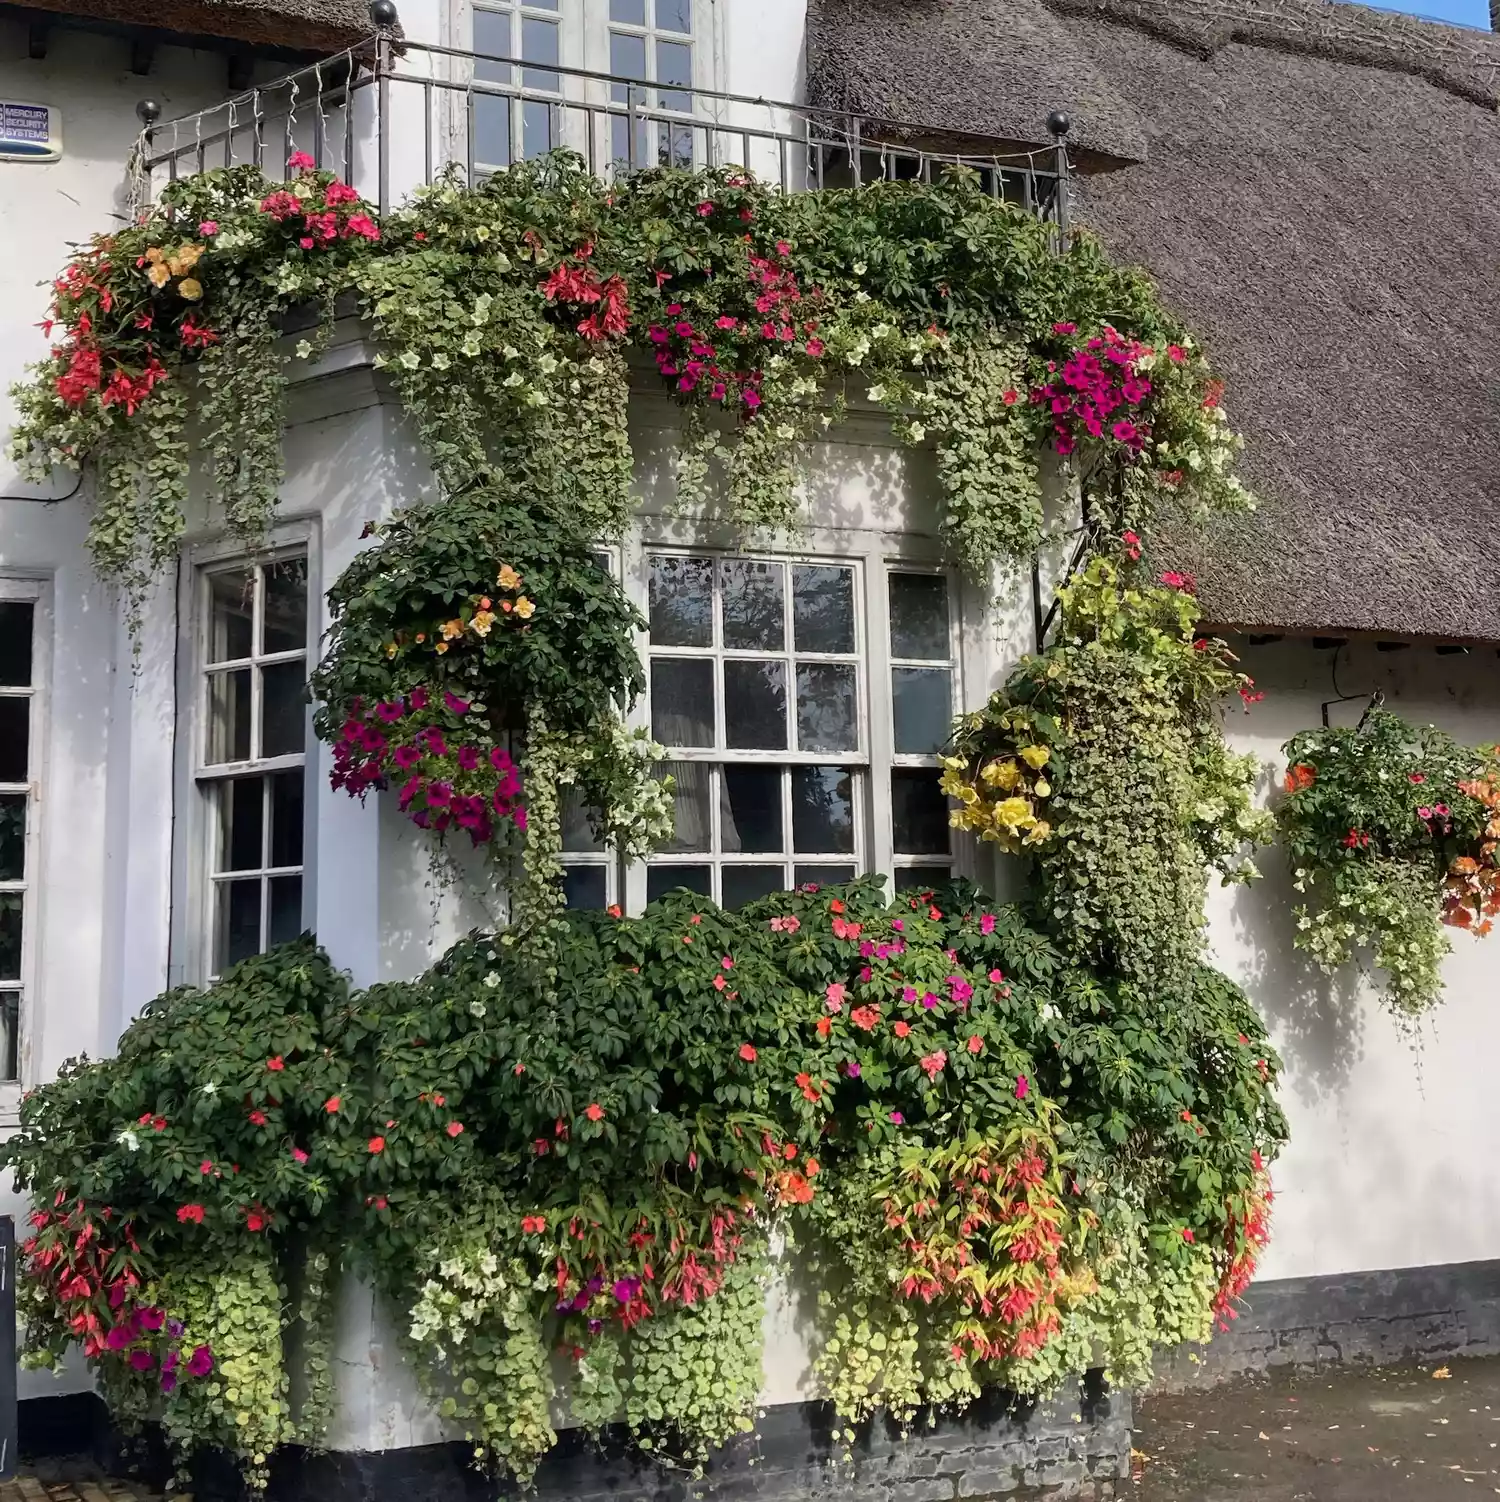 Pub exterior with overflowing window boxes and hanging baskets of colorful annuals